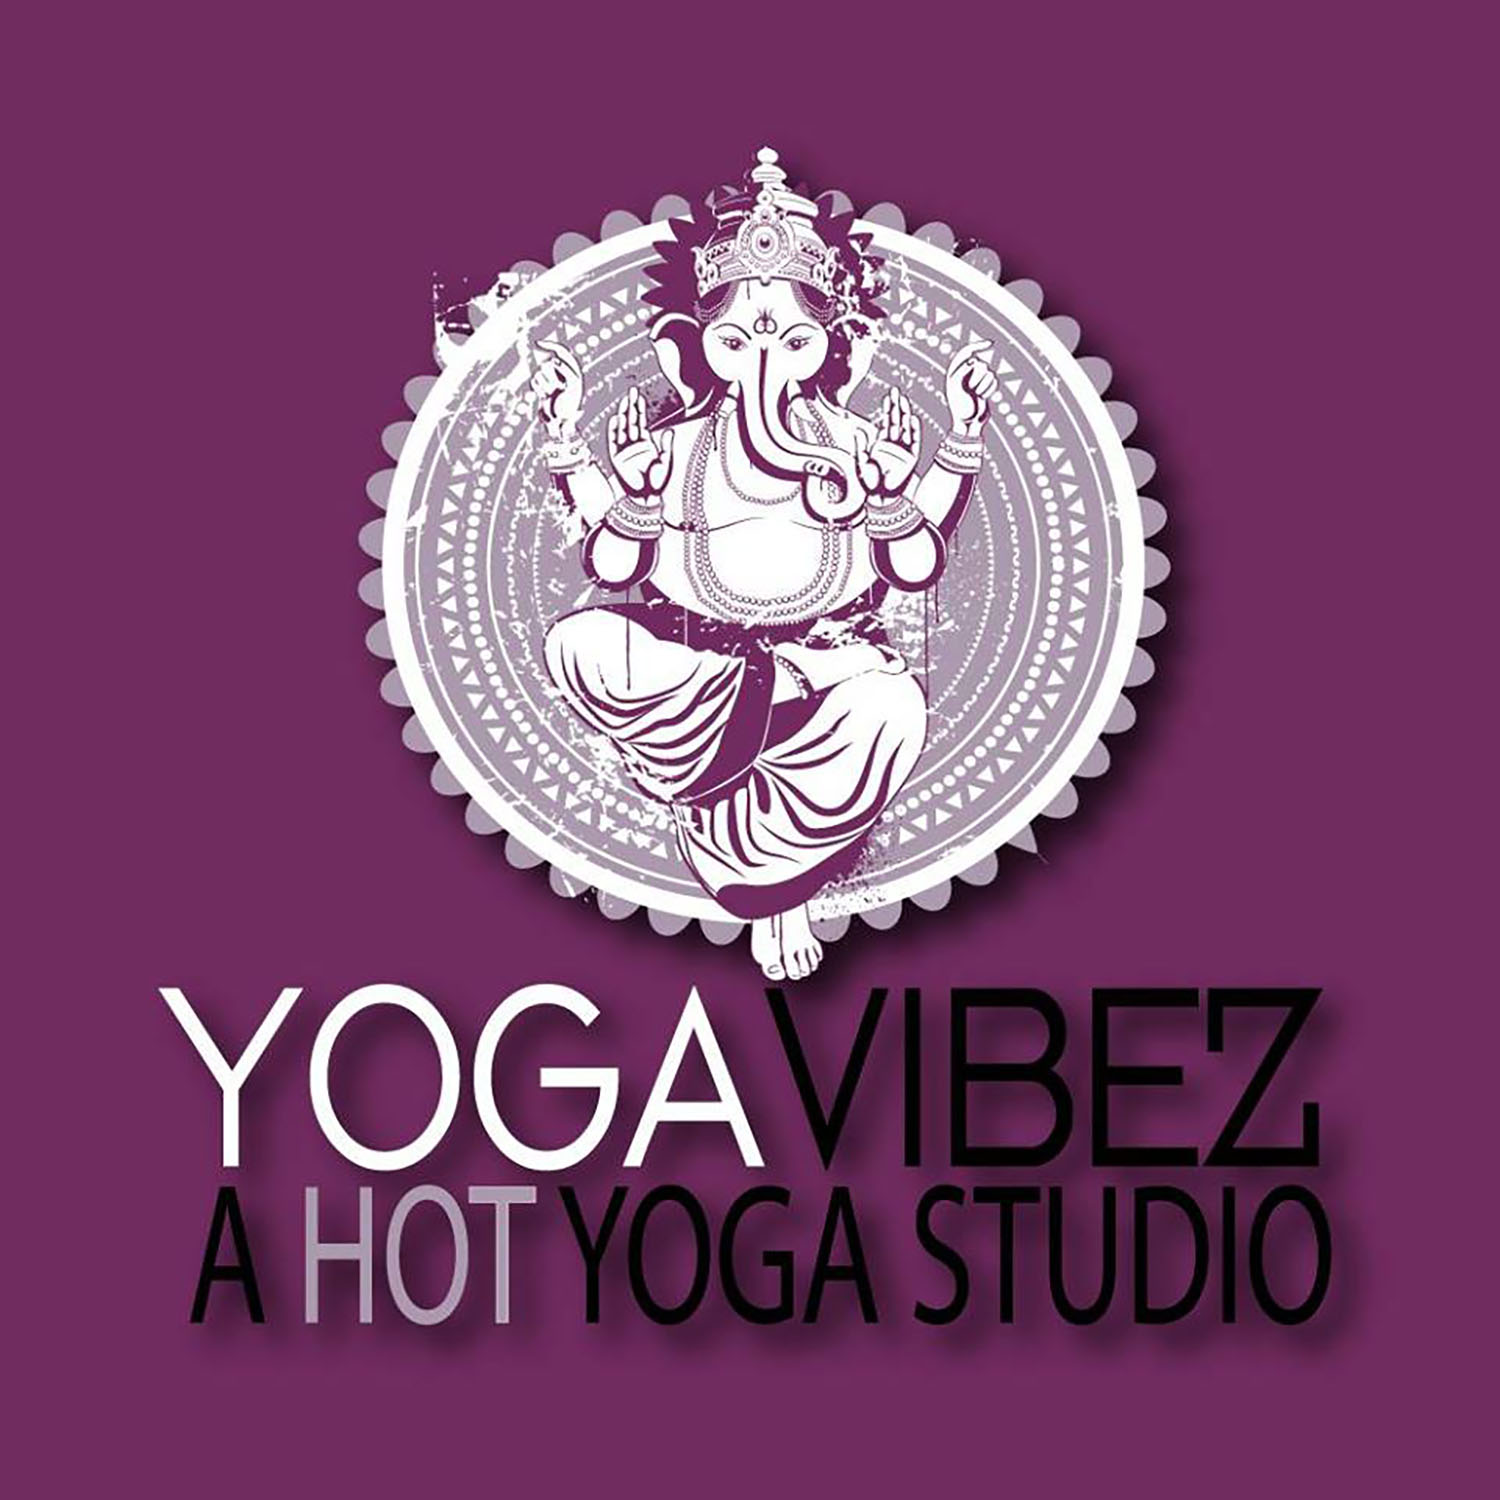 Come spend a day at our waterfront Yoga studio at Yogavibez Edgewater.